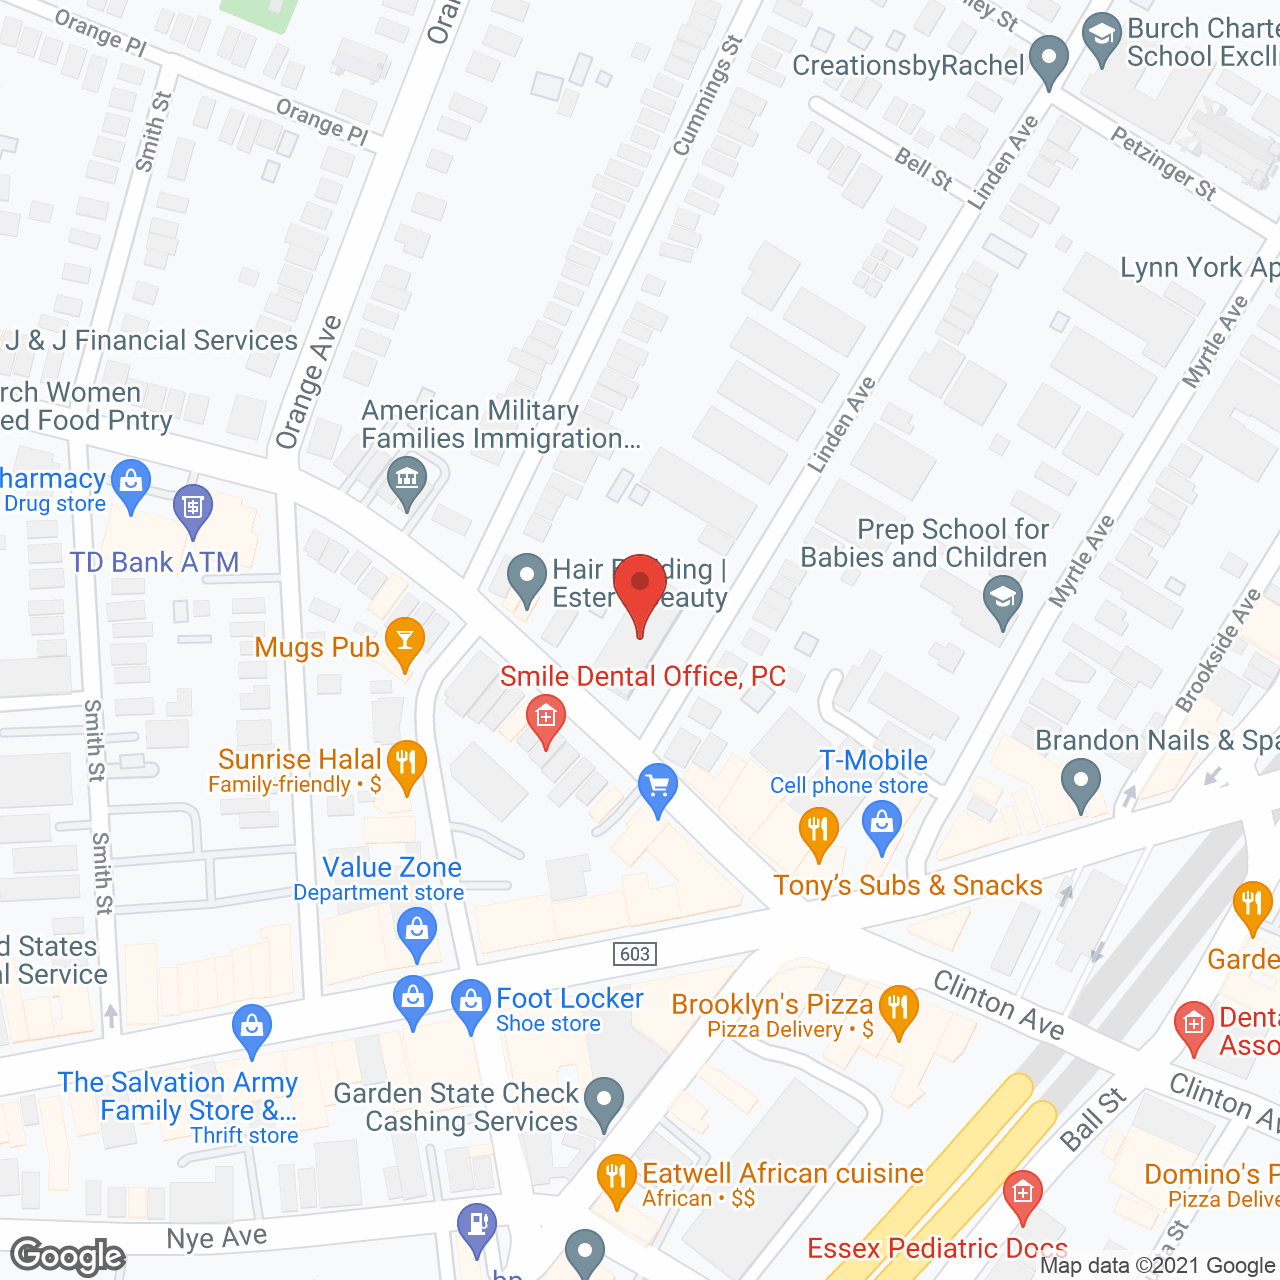 Jewish Federation Towers in google map